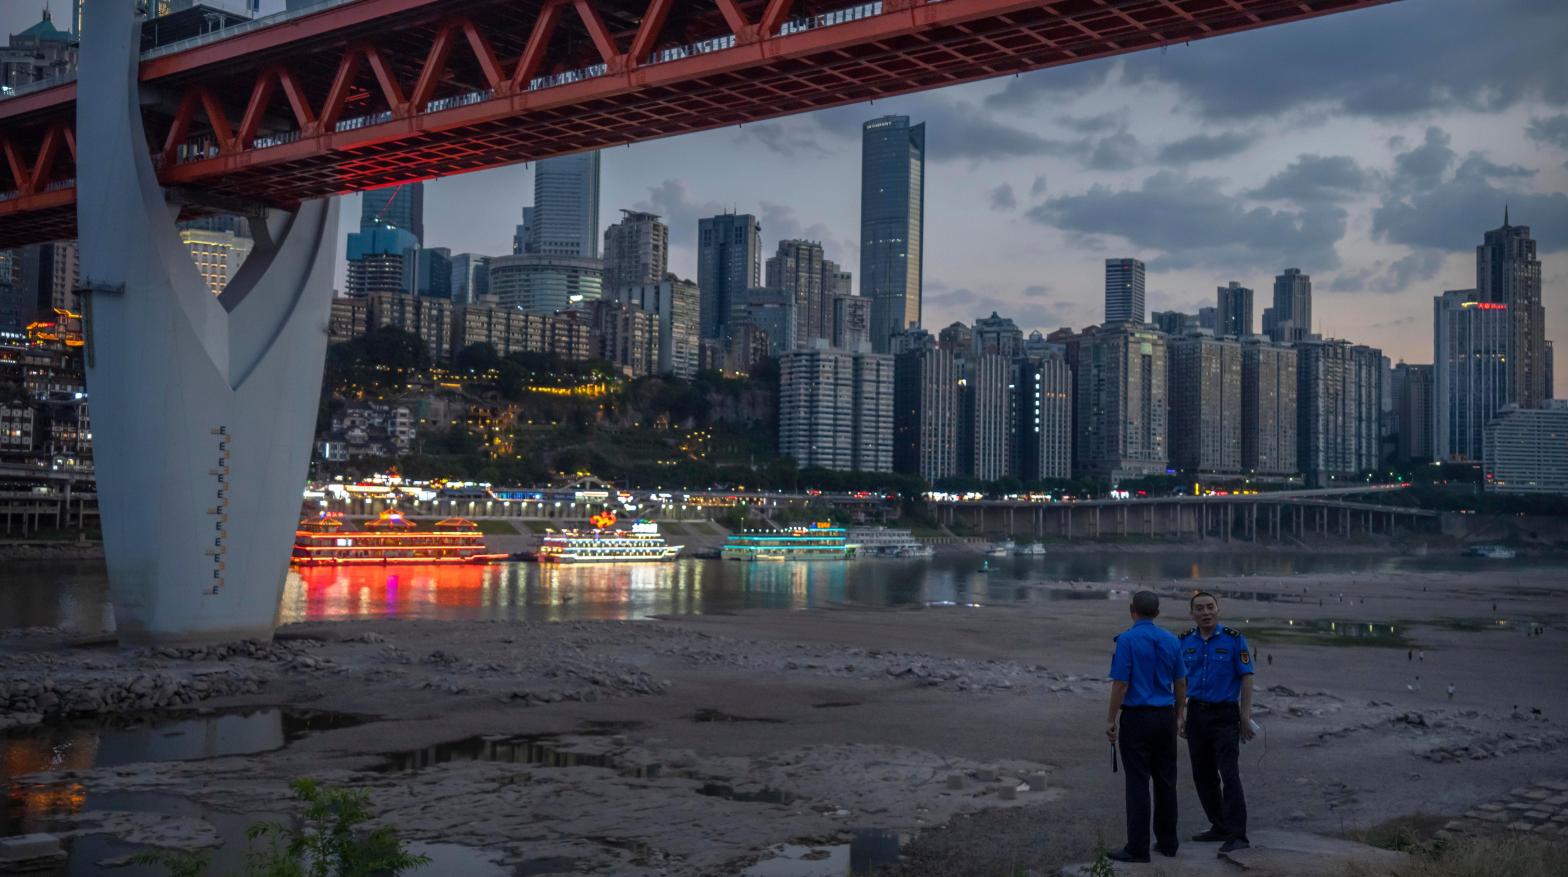 Security officers stand in the dried-out riverbed of the Jialing River in Chonqing on August 20. (Photo: Mark Schiefelbein, AP)